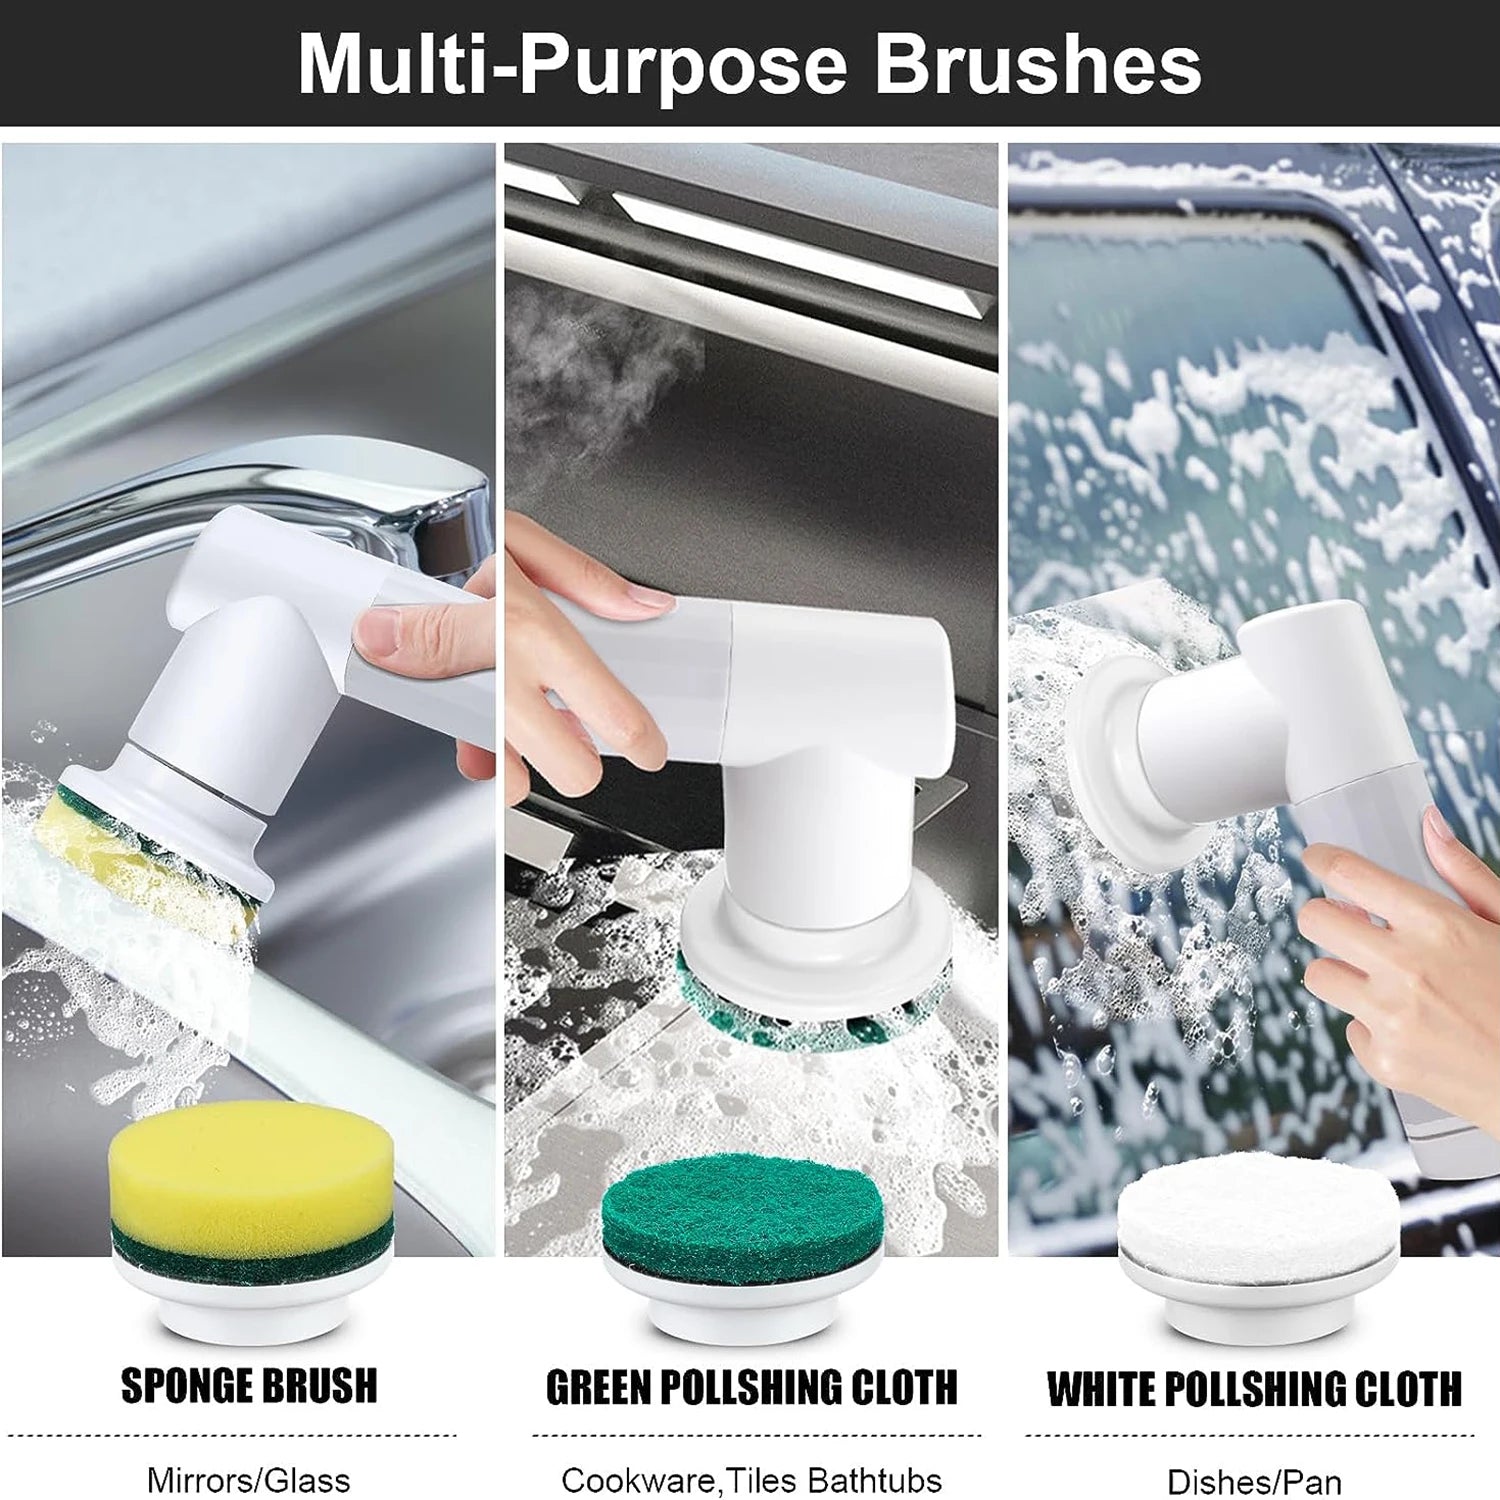 Electric Spin Scrubber Cordless Cleaning Brush with 2 Rotating Speeds & 6 Replaceable Heads for Bathroom,Kitchen,Wall,Oven,Dish